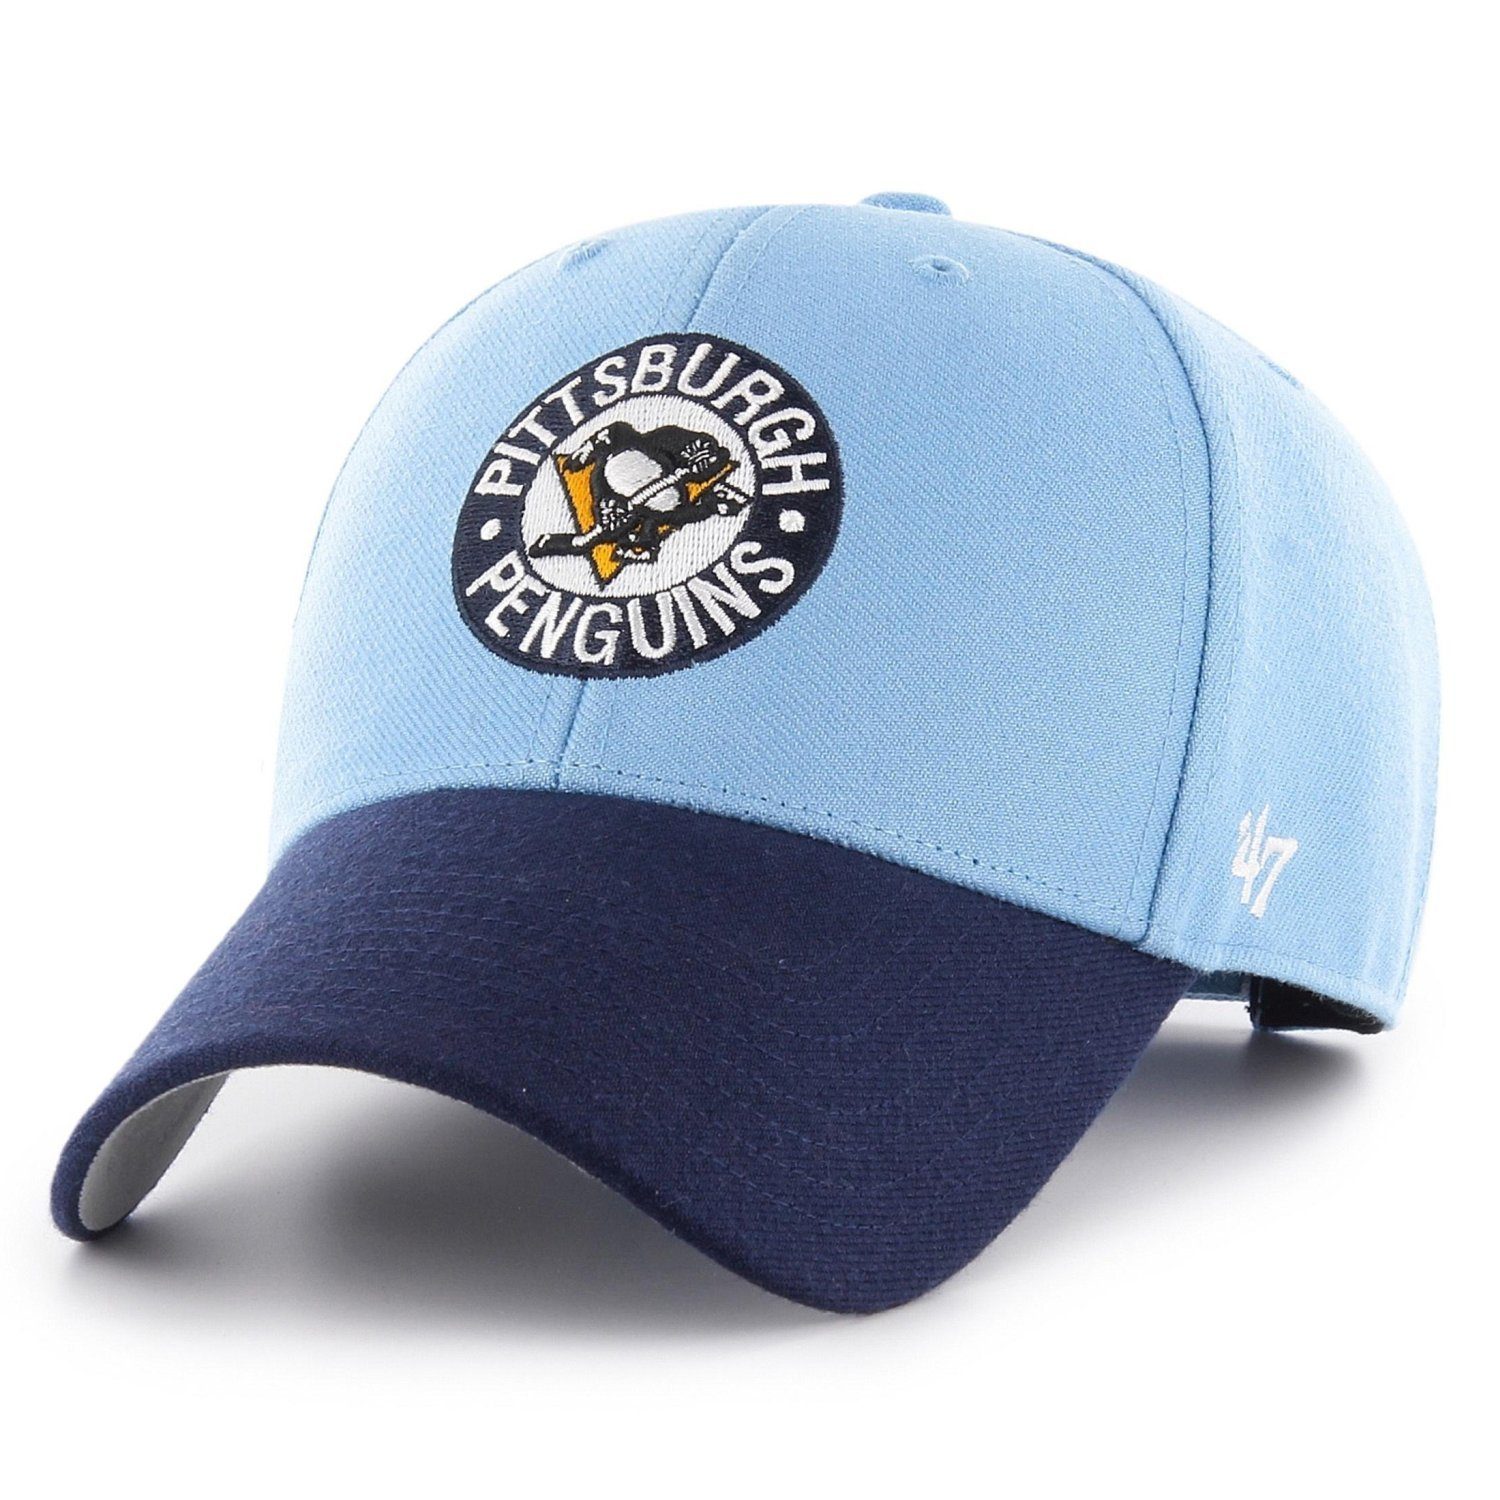 '47 Trucker NHL Fit Cap Penguins Brand Pittsburgh Relaxed